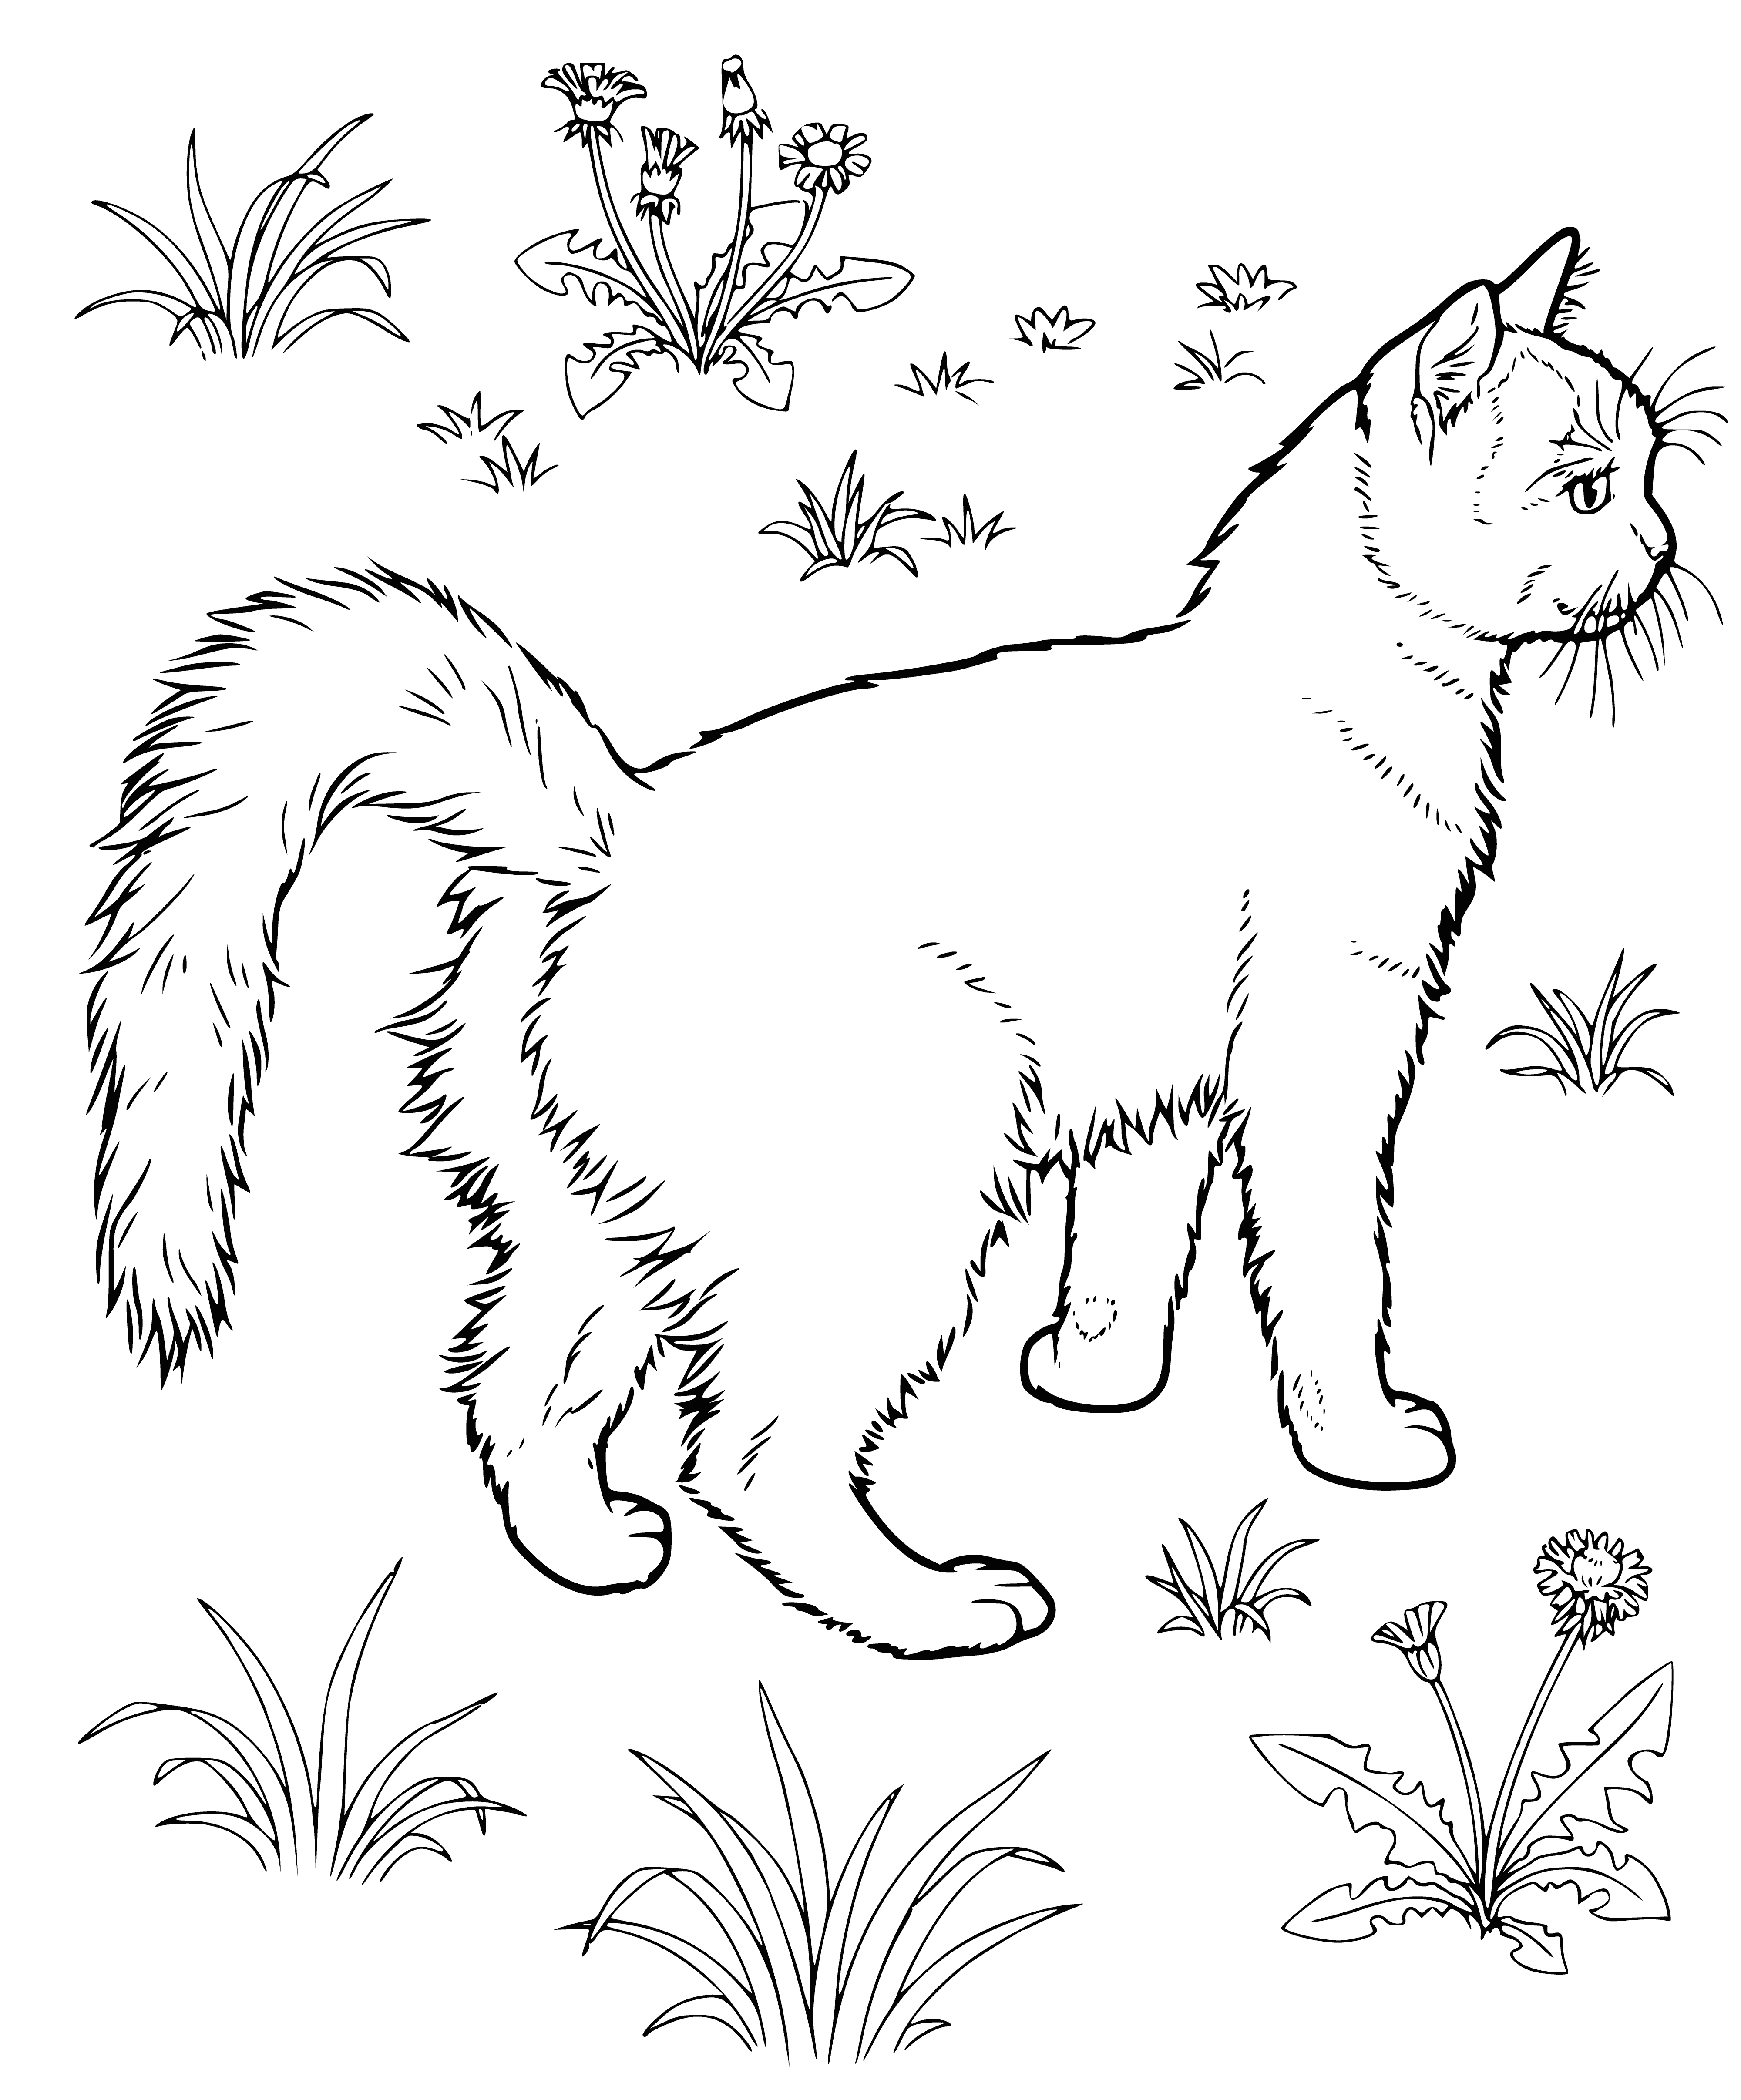 coloring page: A black & white cat is curled up on a gray couch, its eyes closed and head resting on its paws.